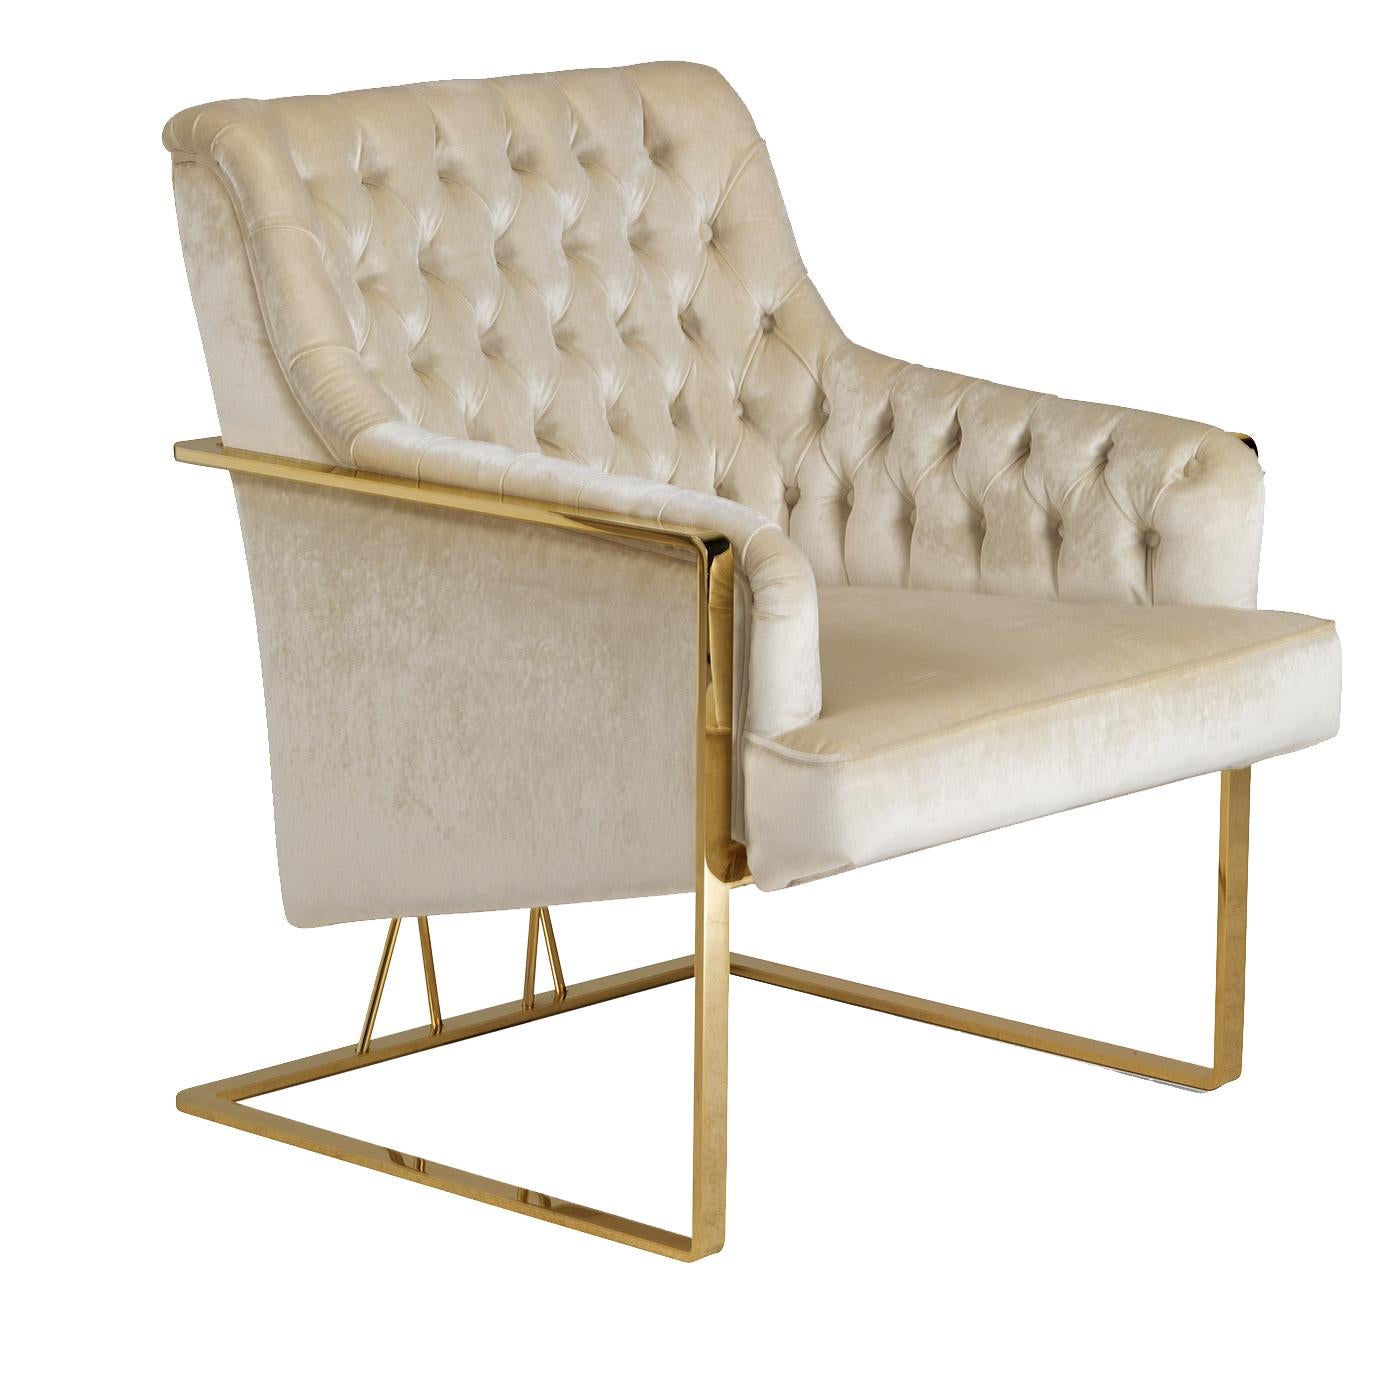 A unique combination of comfort and elegant design, this armchair will create a sophisticated ambiance in both a Classic and a contemporary home. As accent chair in a living room or entryway, this piece will make an elegant statement. Its metal